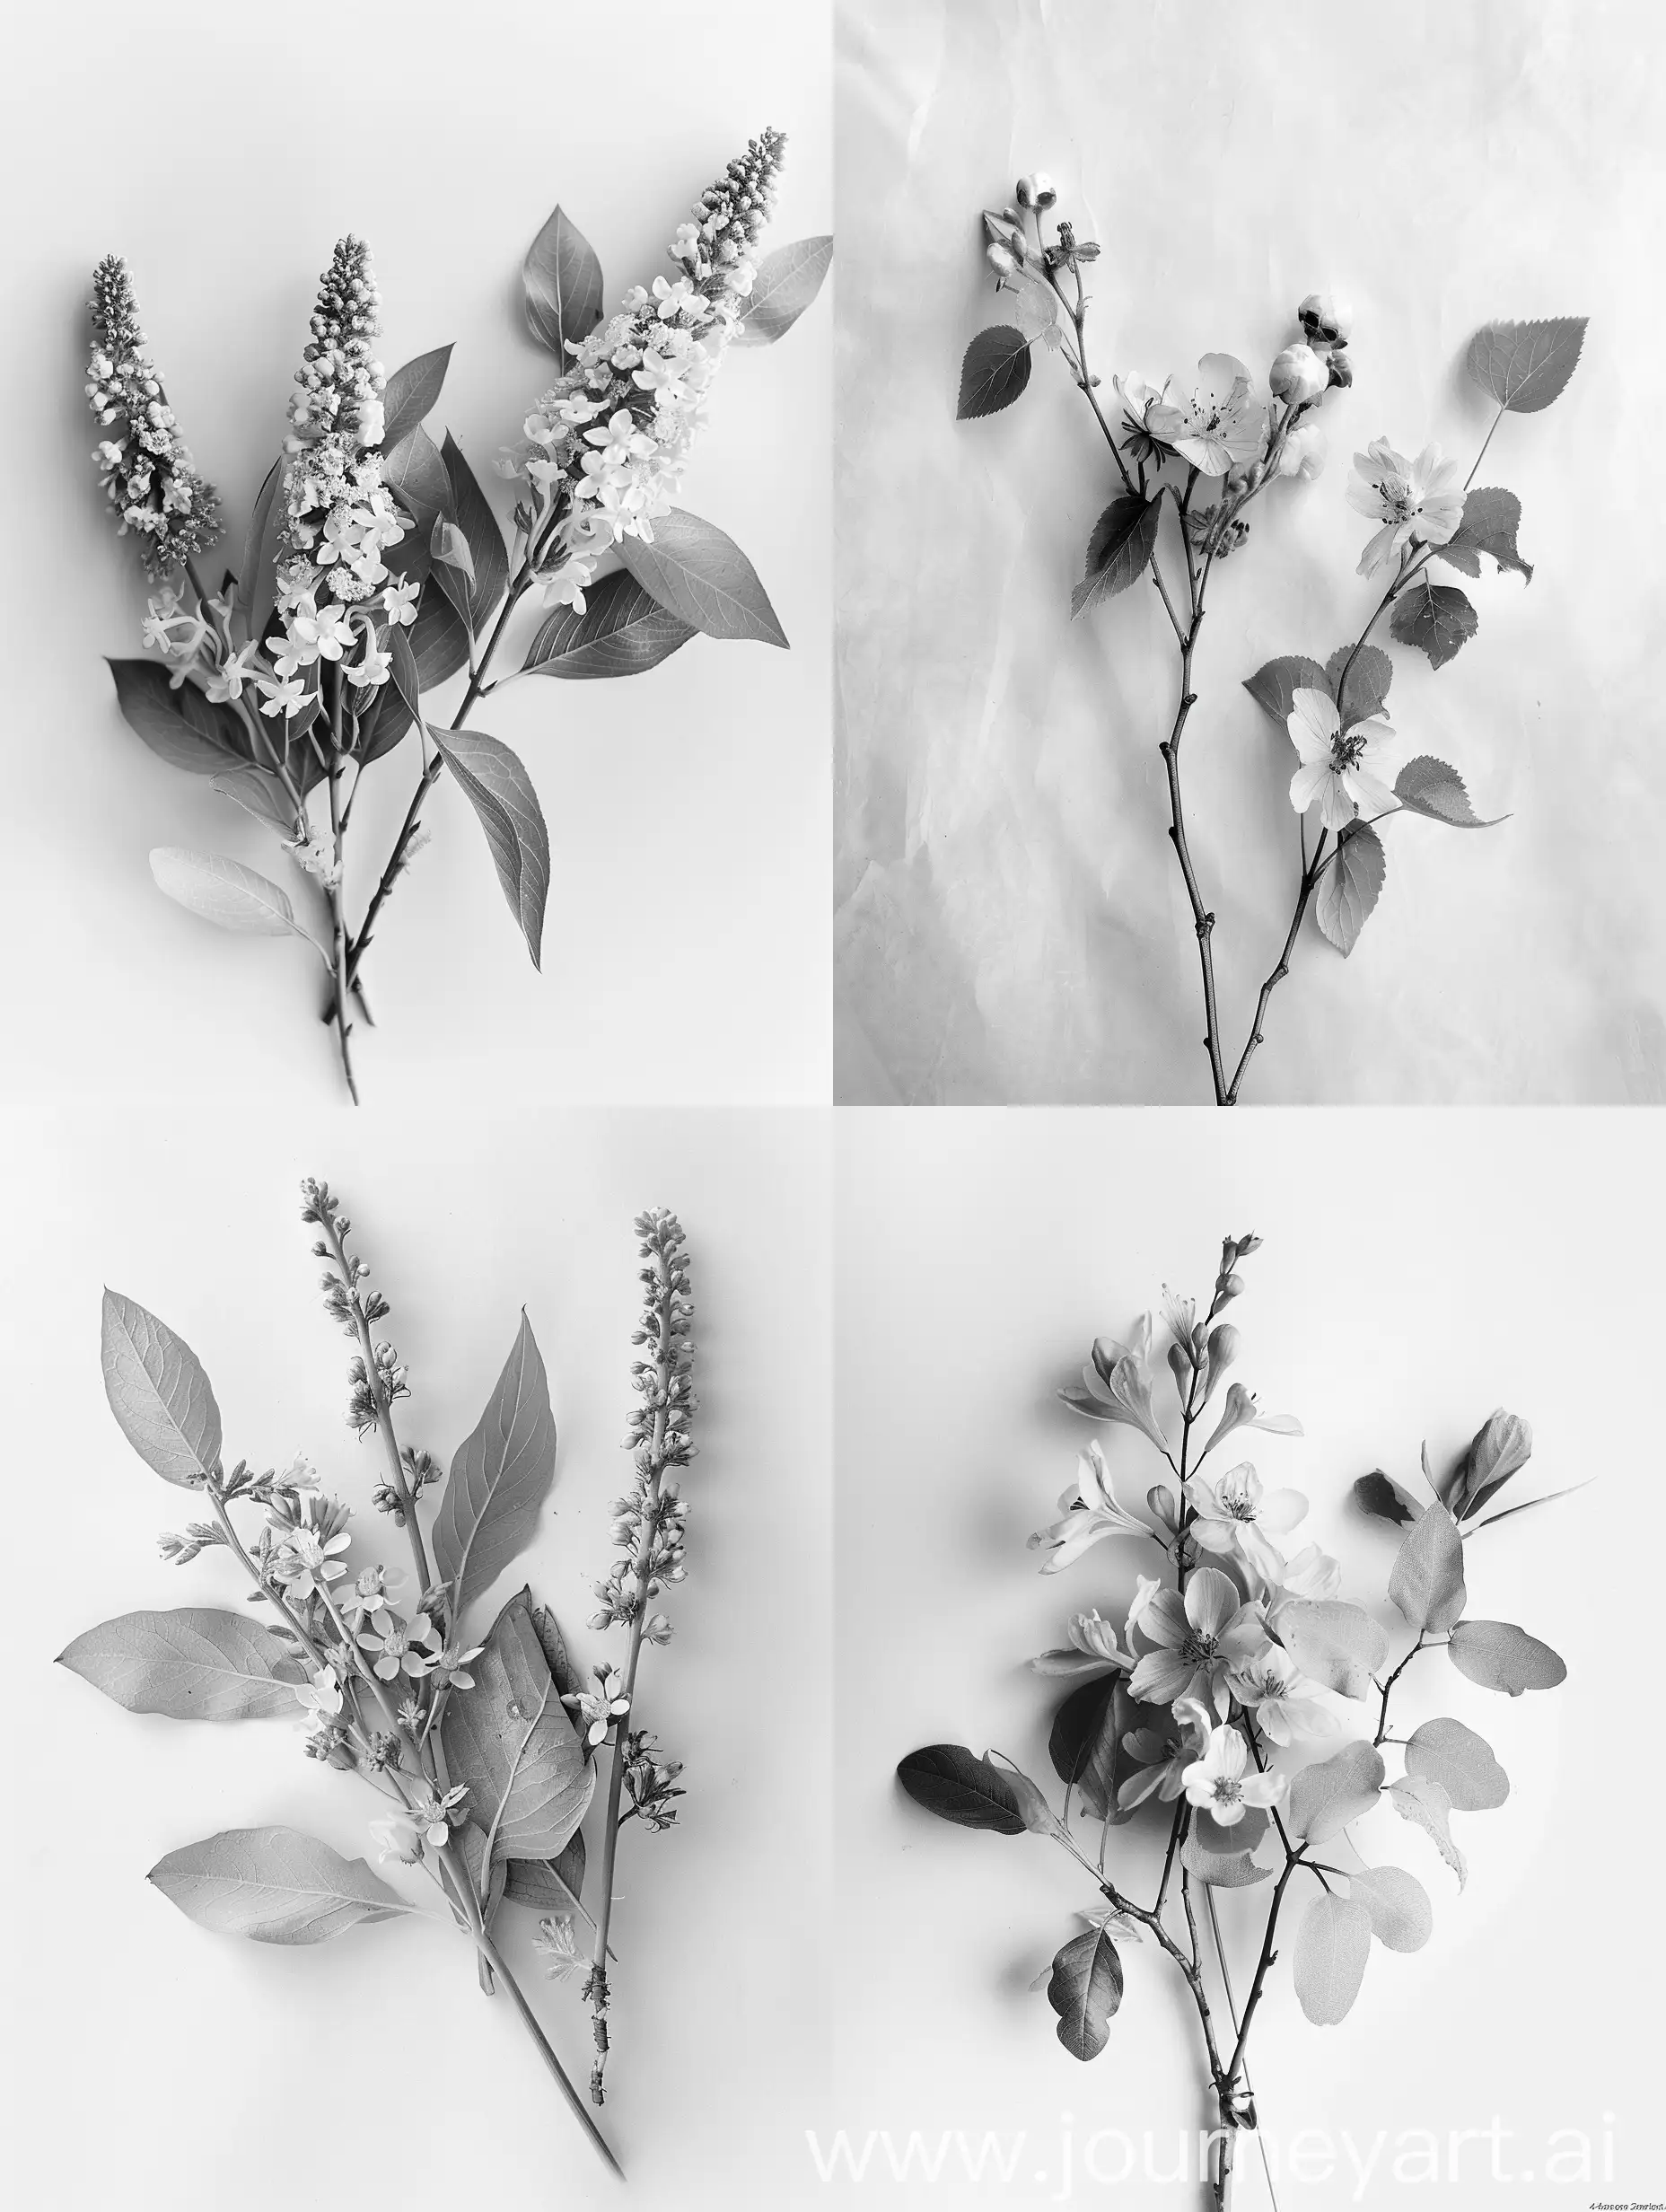 black and white photo, 3 branches of wild flowers on a white background, with leaves, bouquet, flatley,

black and white photo, highest detail, photo 4к